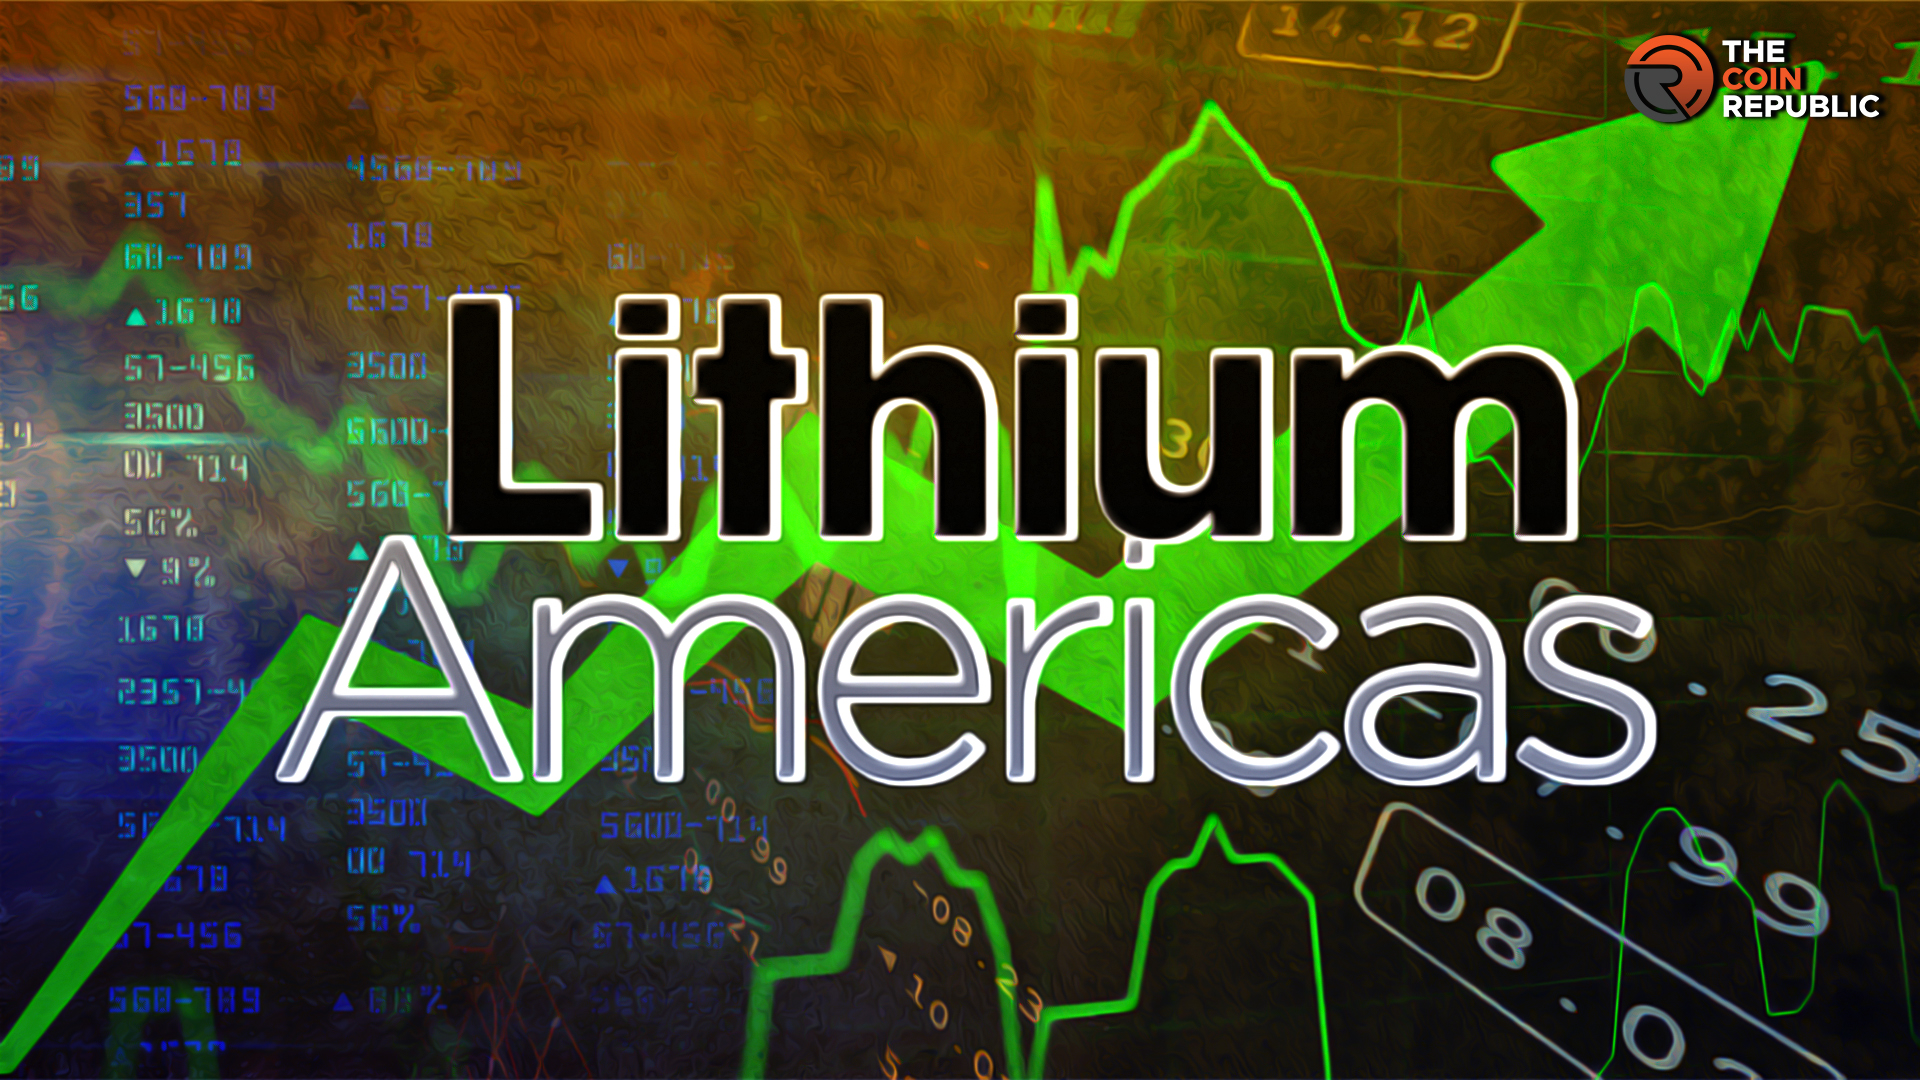 Lithium Americas Stock Price Has Potential to Gain 25% in October